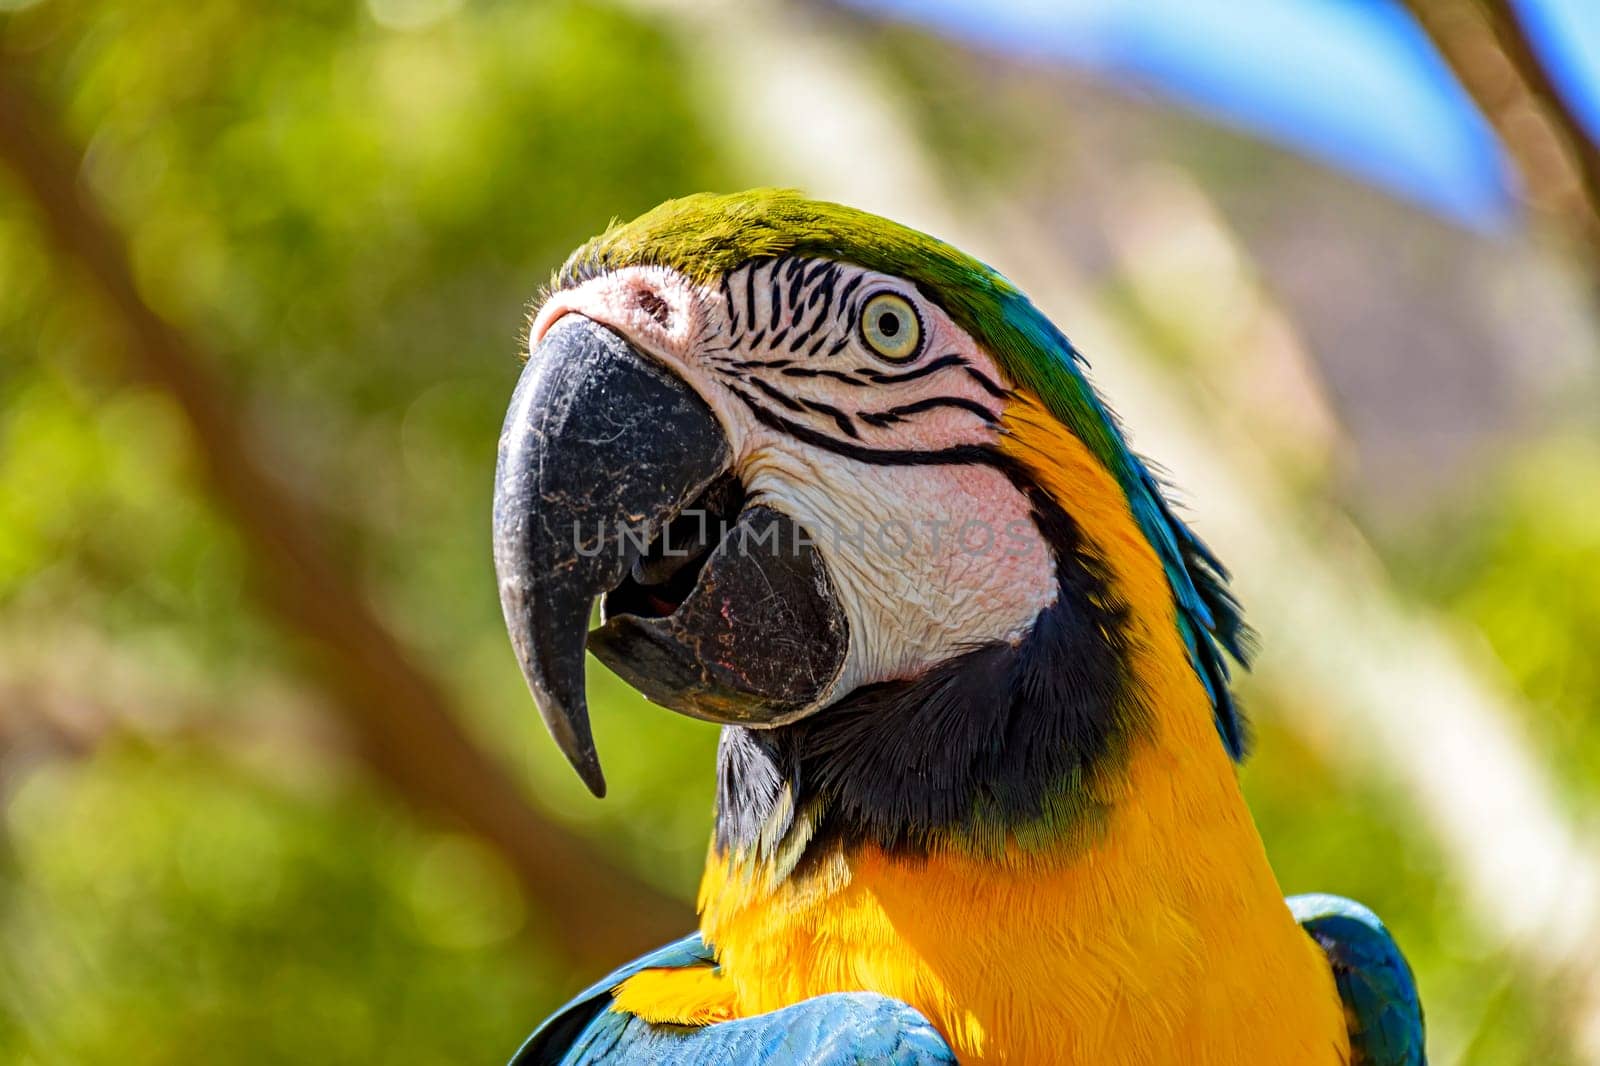 Macaw perched on a branch with vegetation of the Brazilian rainforest behind